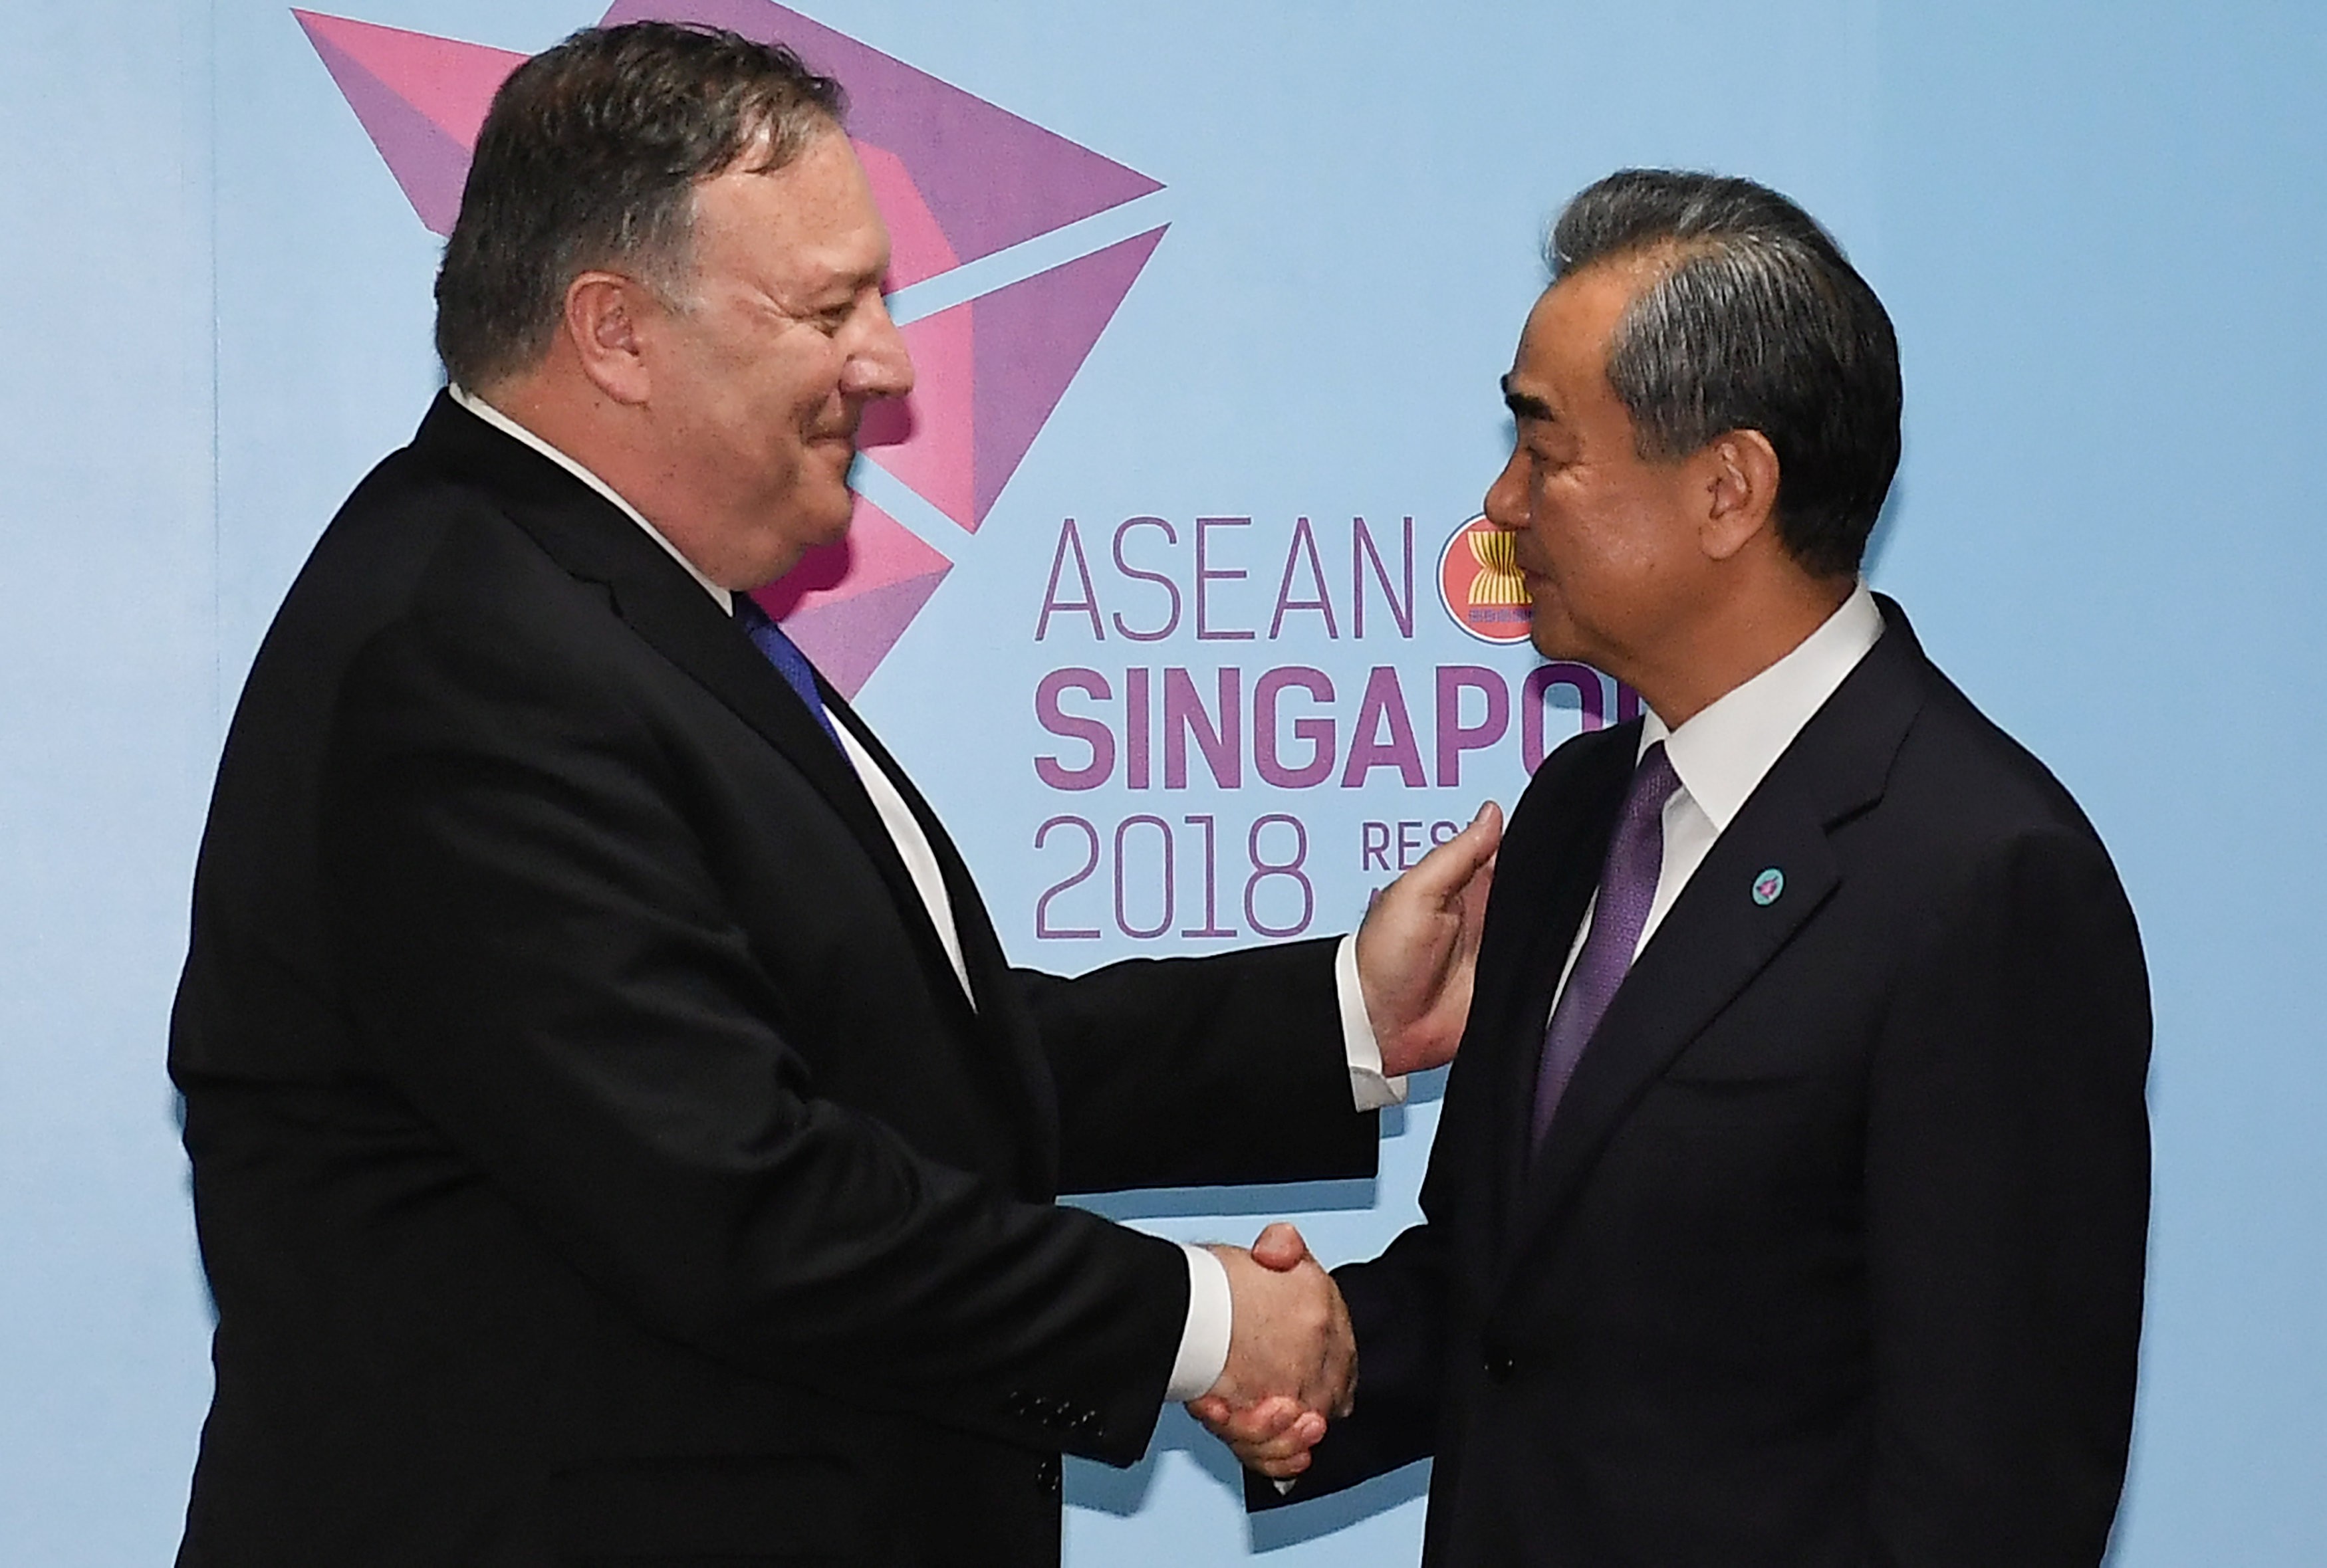 US Secretary of State Mike Pompeo and China's Foreign Minister Wang Yi shake hands before their bilateral meeting at the 51st Association of Southeast Asian Nations in Singapore. Photo: Reuters